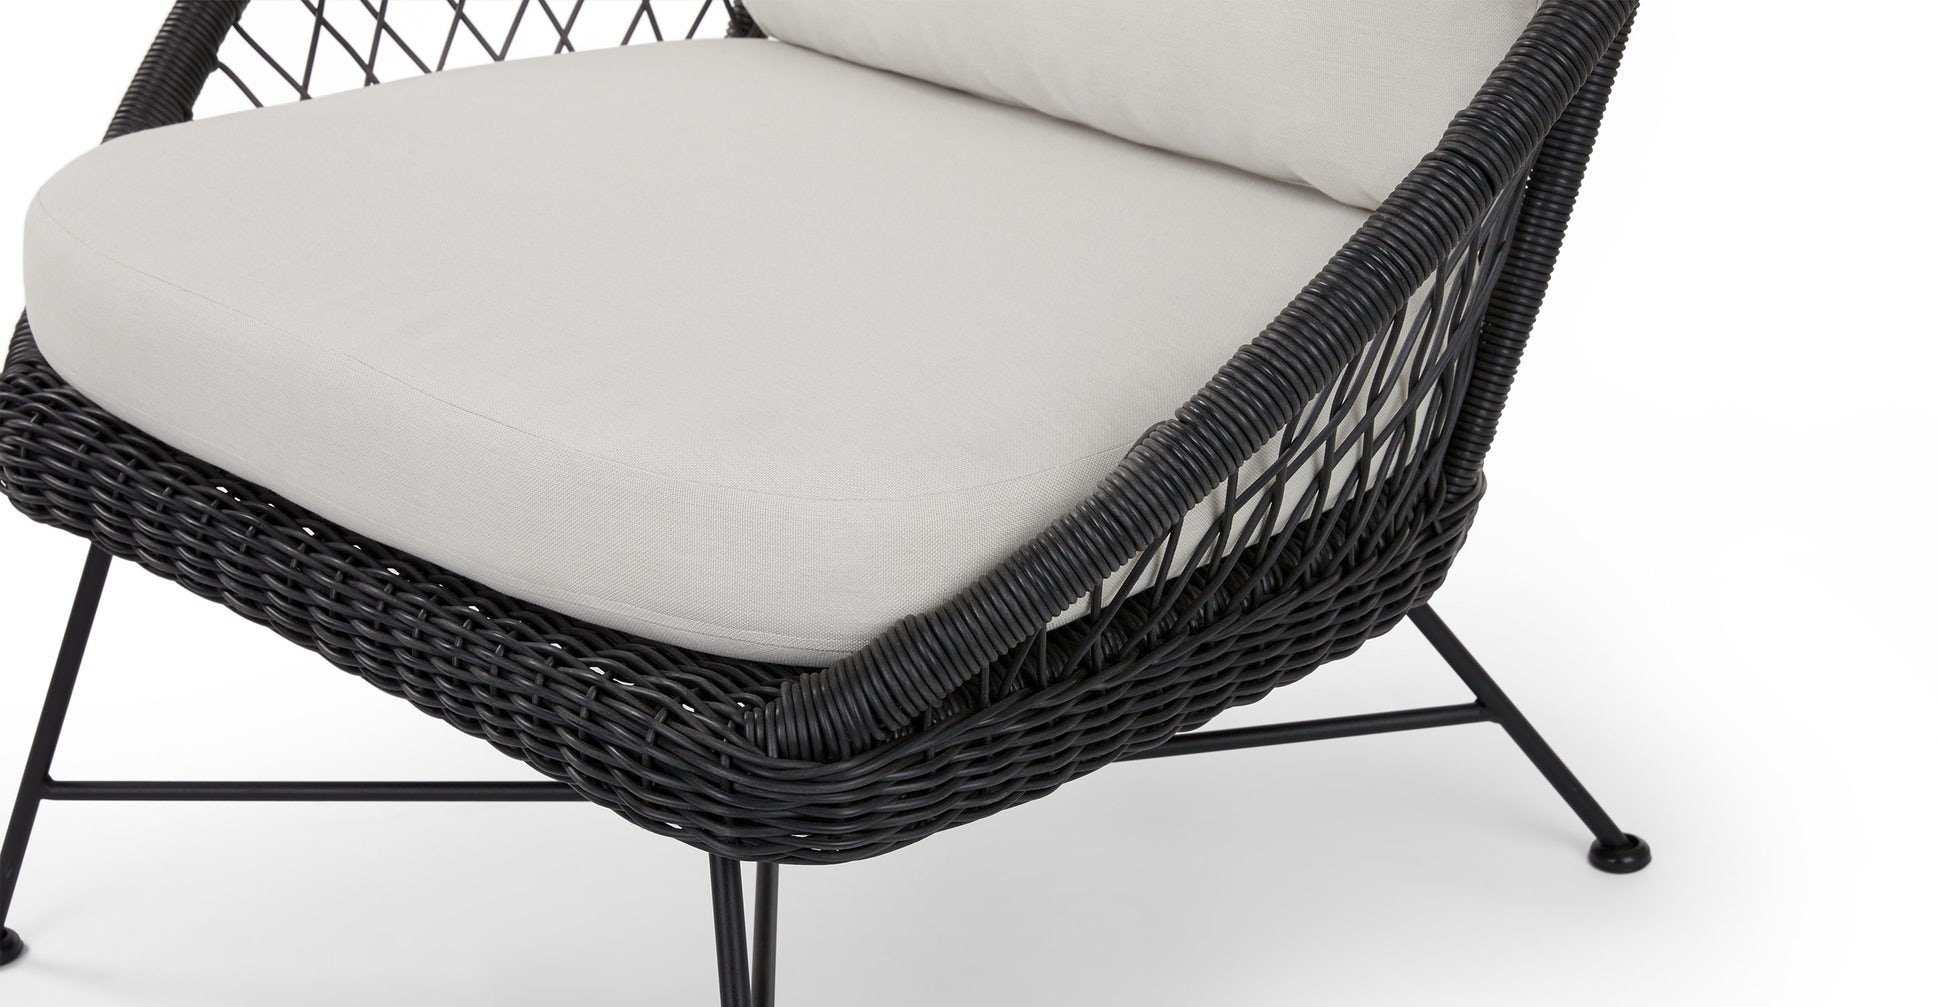 Aeri Lily White Lounge Chair - Image 3